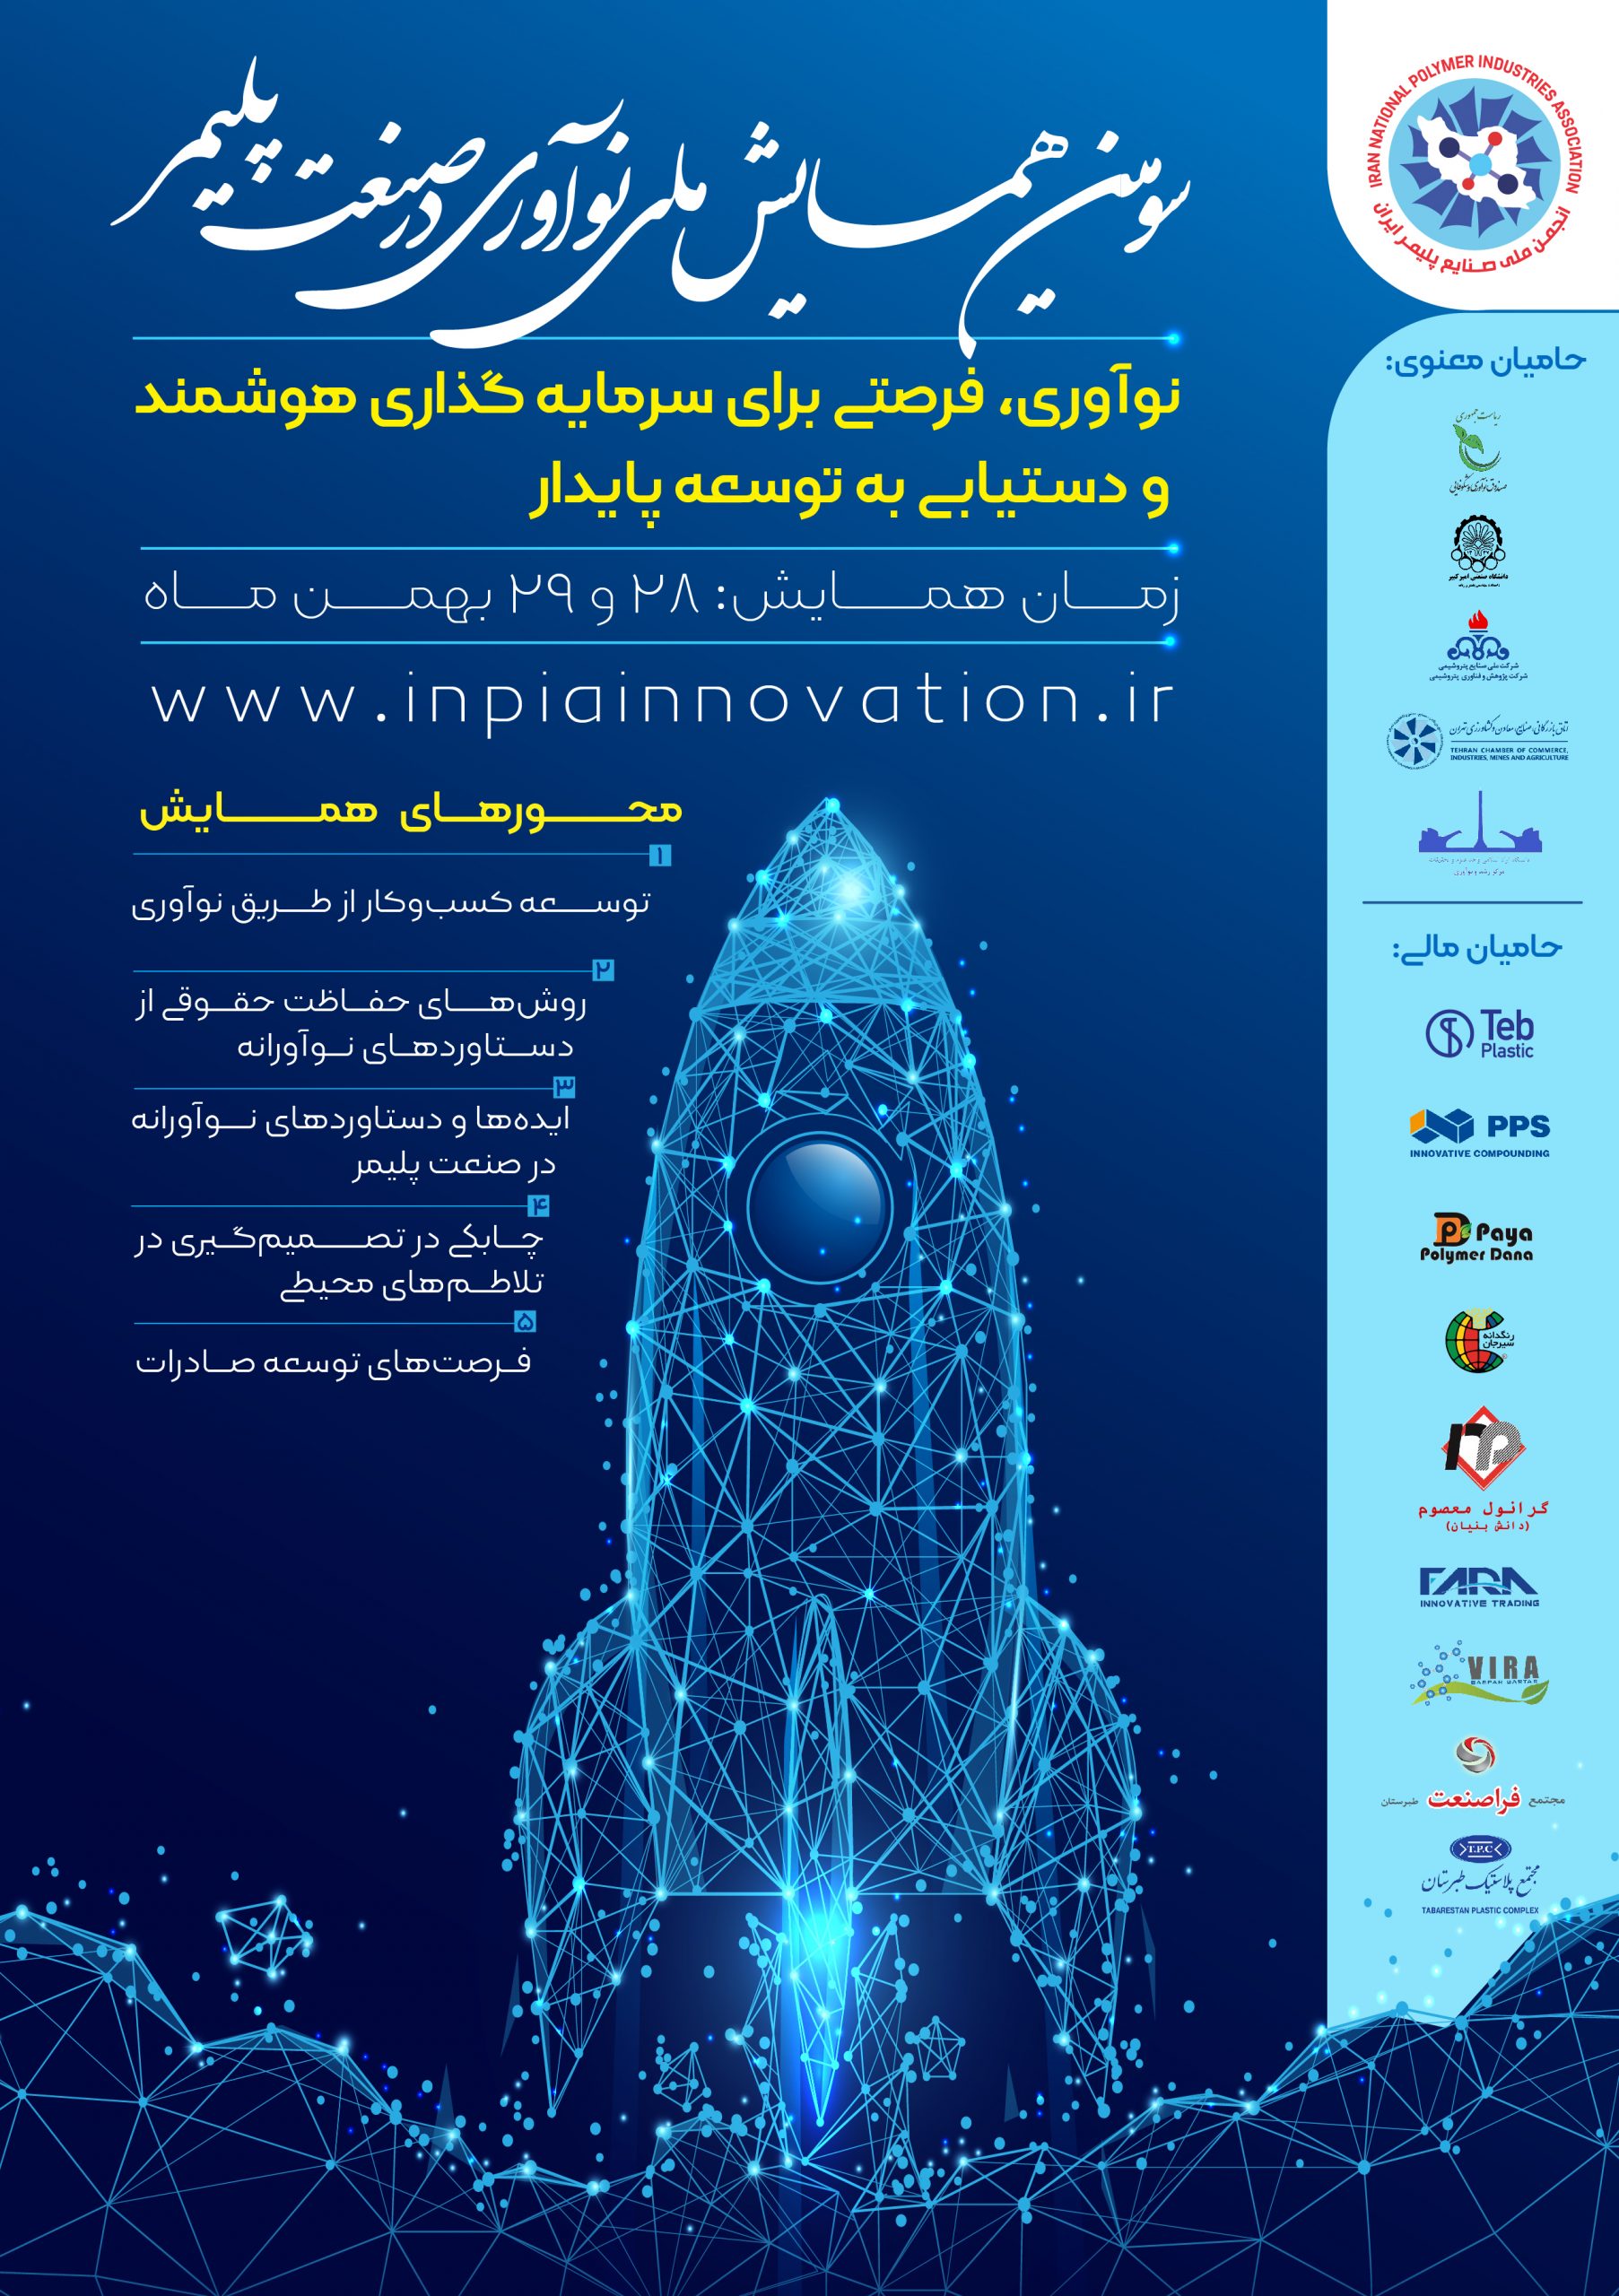 An overview of the background of the spiritual sponsors of the third conference on innovation in the plastics industry